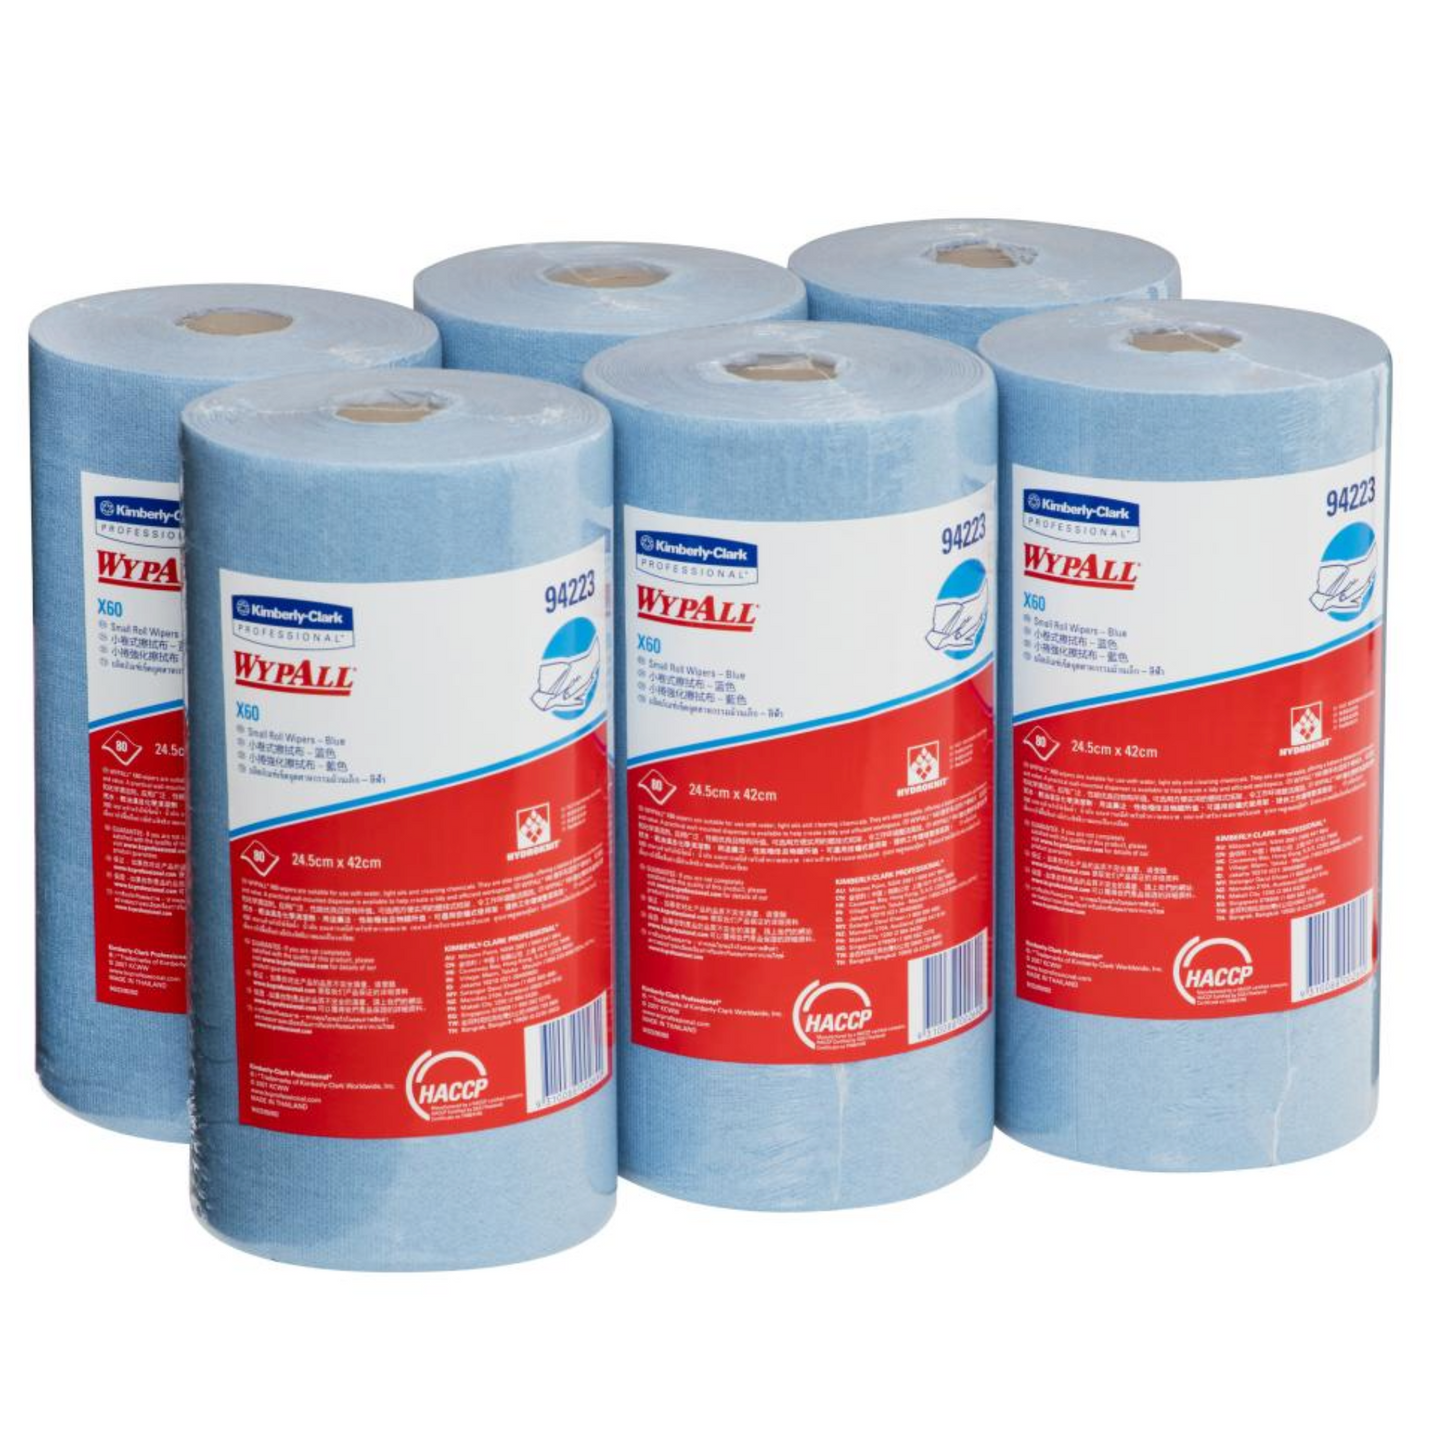 Wypall 94223E X60 Small Roll Blue 80 Wipers Per Roll Case of 6 Rolls